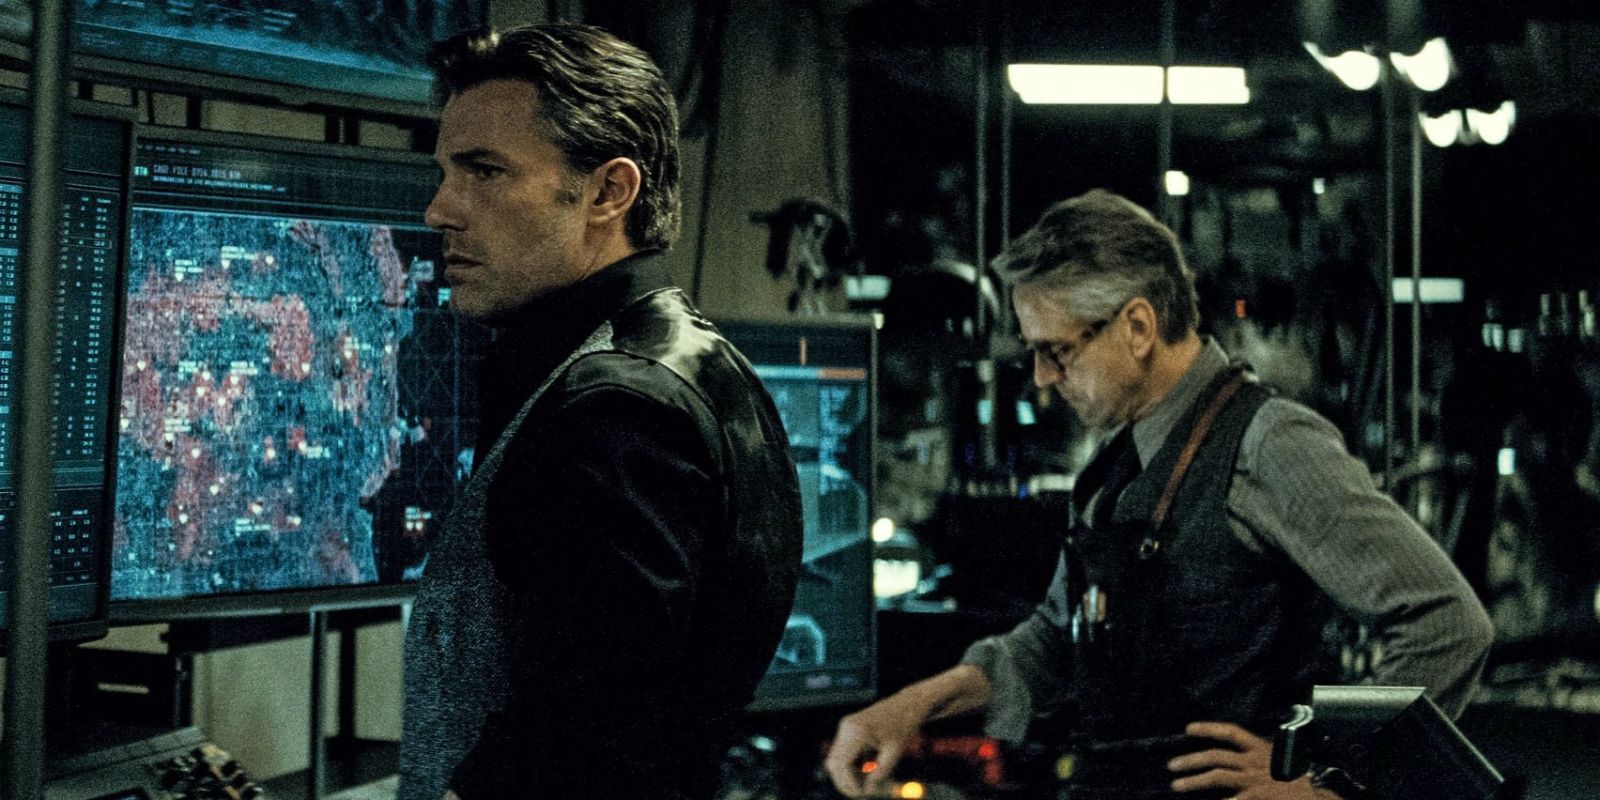 Bruce Wayne and Alfred Pennyworth standing by the monitors in the Batcave in Batman v Superman